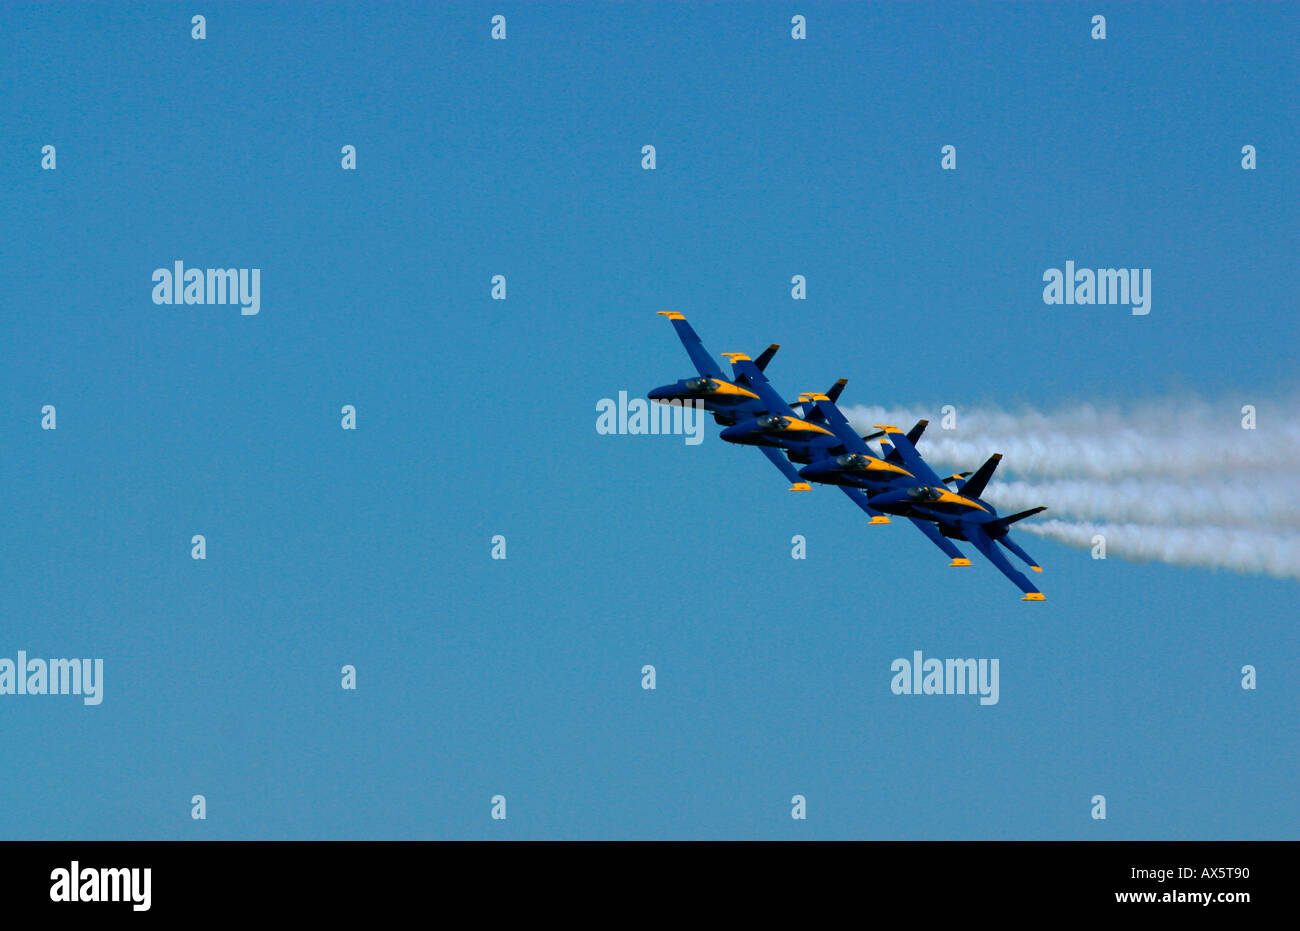 The Blue Angels FA 18s fly in formation with trails of white smoke against a clear blue sky Stock Photo